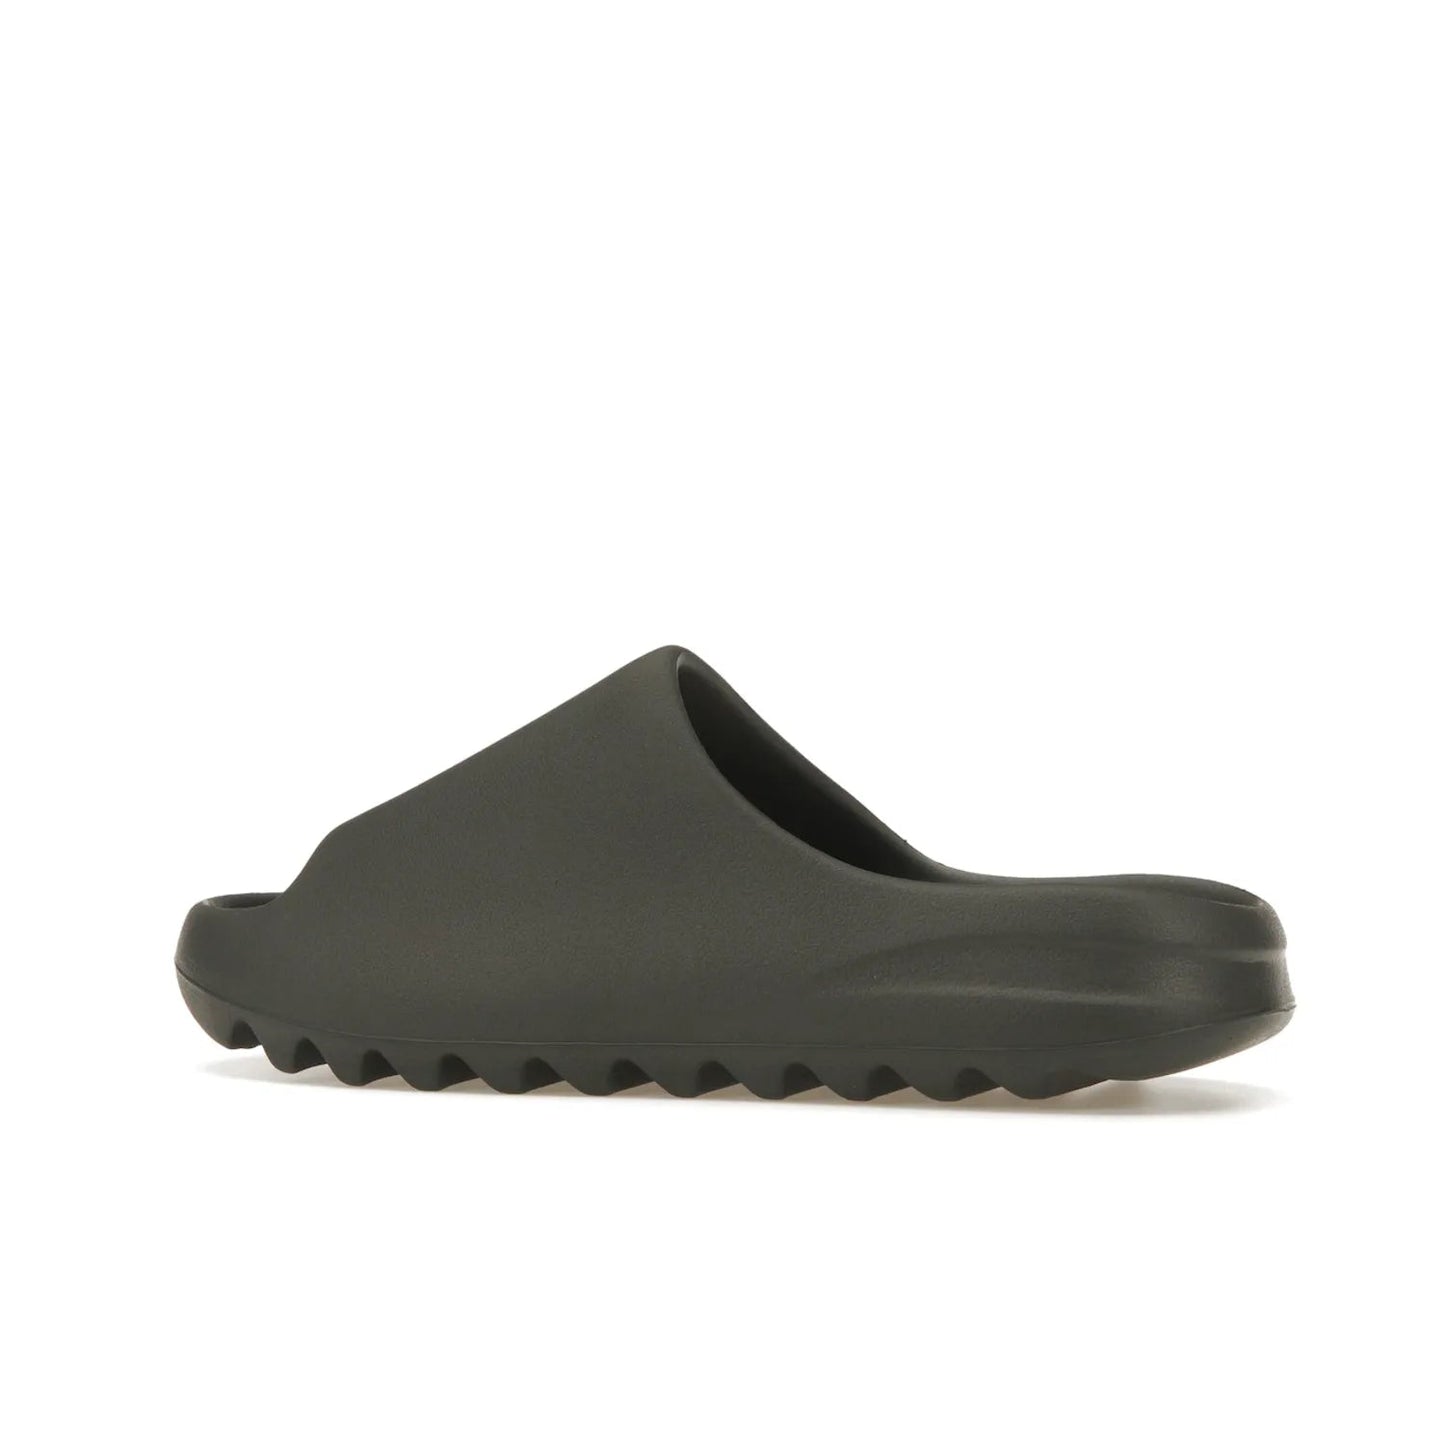 adidas Yeezy Slide Granite - Image 21 - Only at www.BallersClubKickz.com - Introducing the adidas Yeezy Slide Granite with a sleek, soft-to-touch one-piece upper – perfect for making a statement with its minimalistic design and luxurious comfort. Get yours now for only $70.